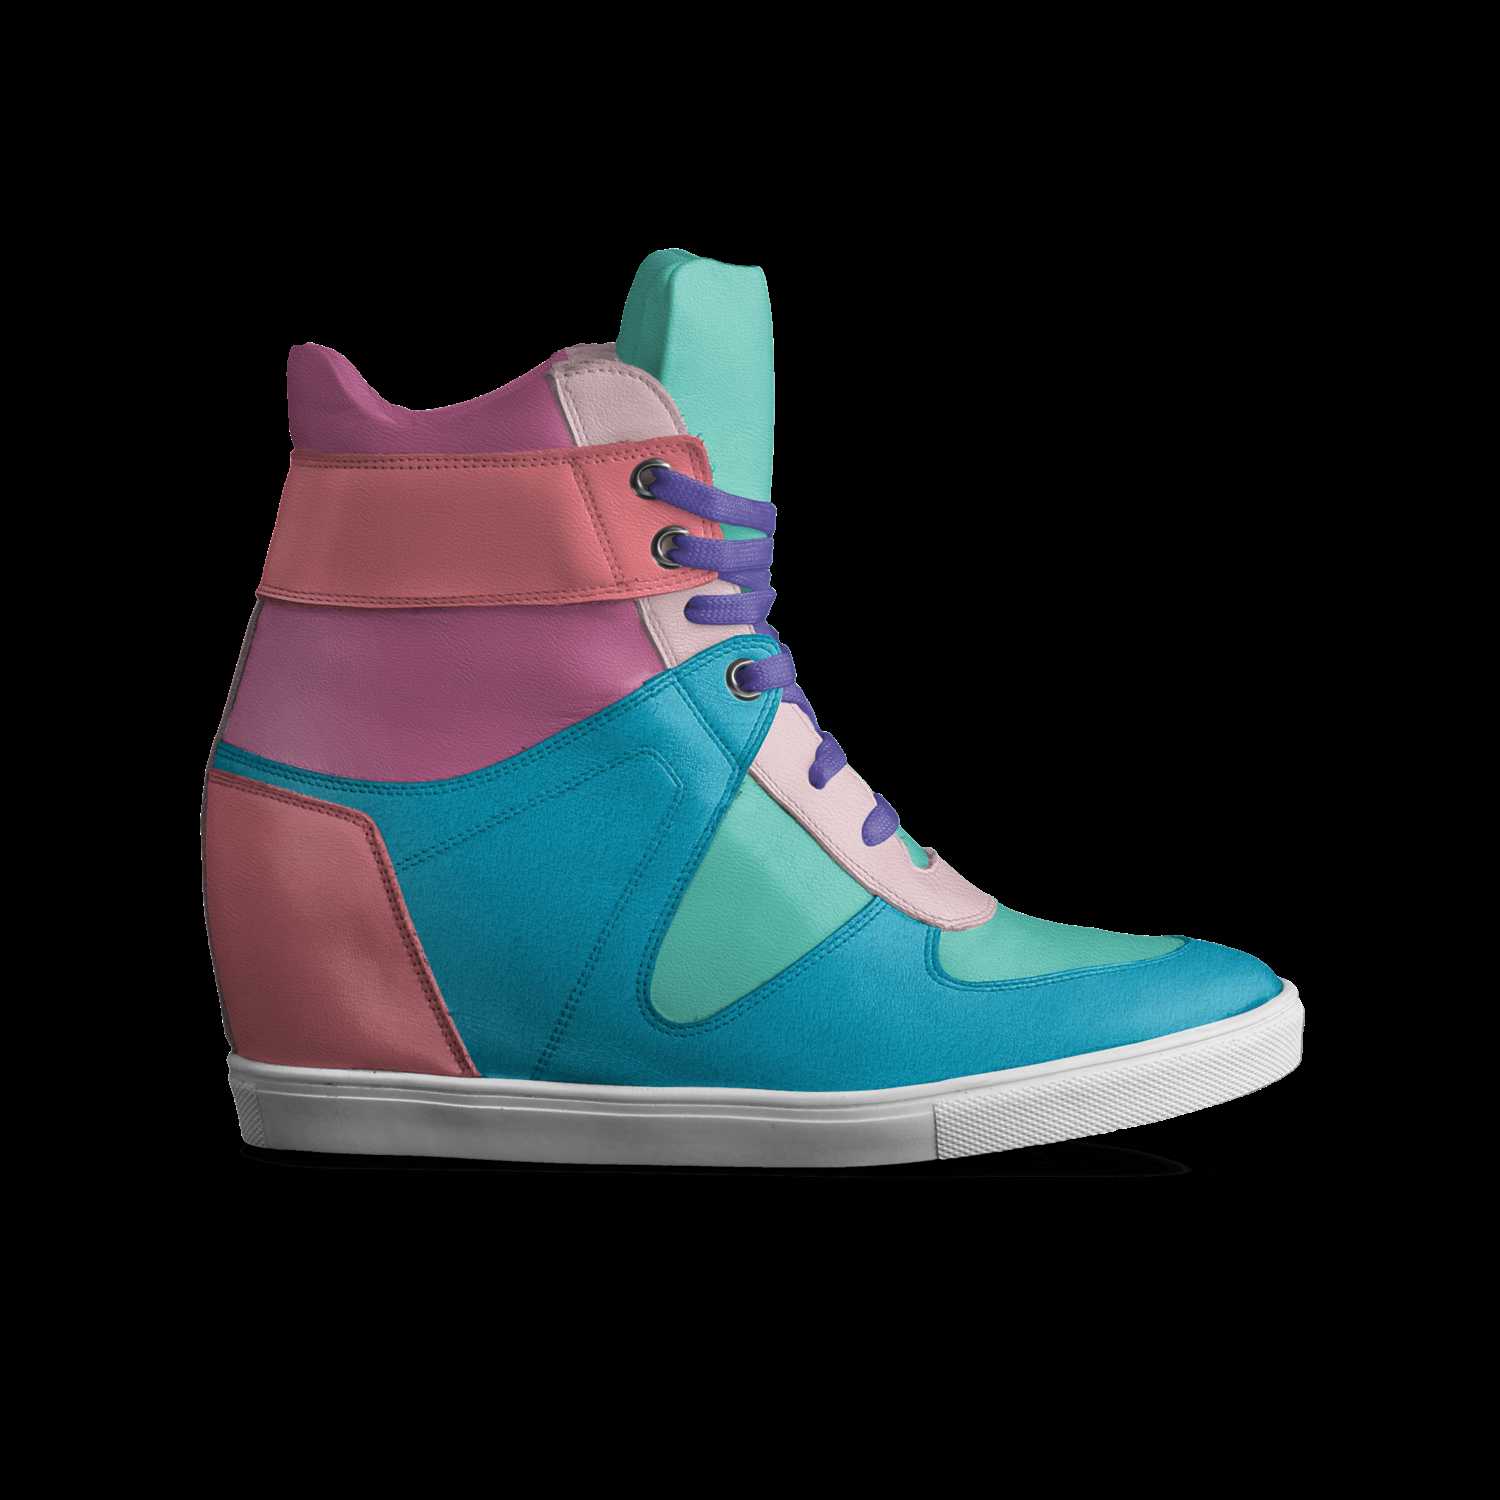 Cool | A Custom Shoe concept by Hhshd